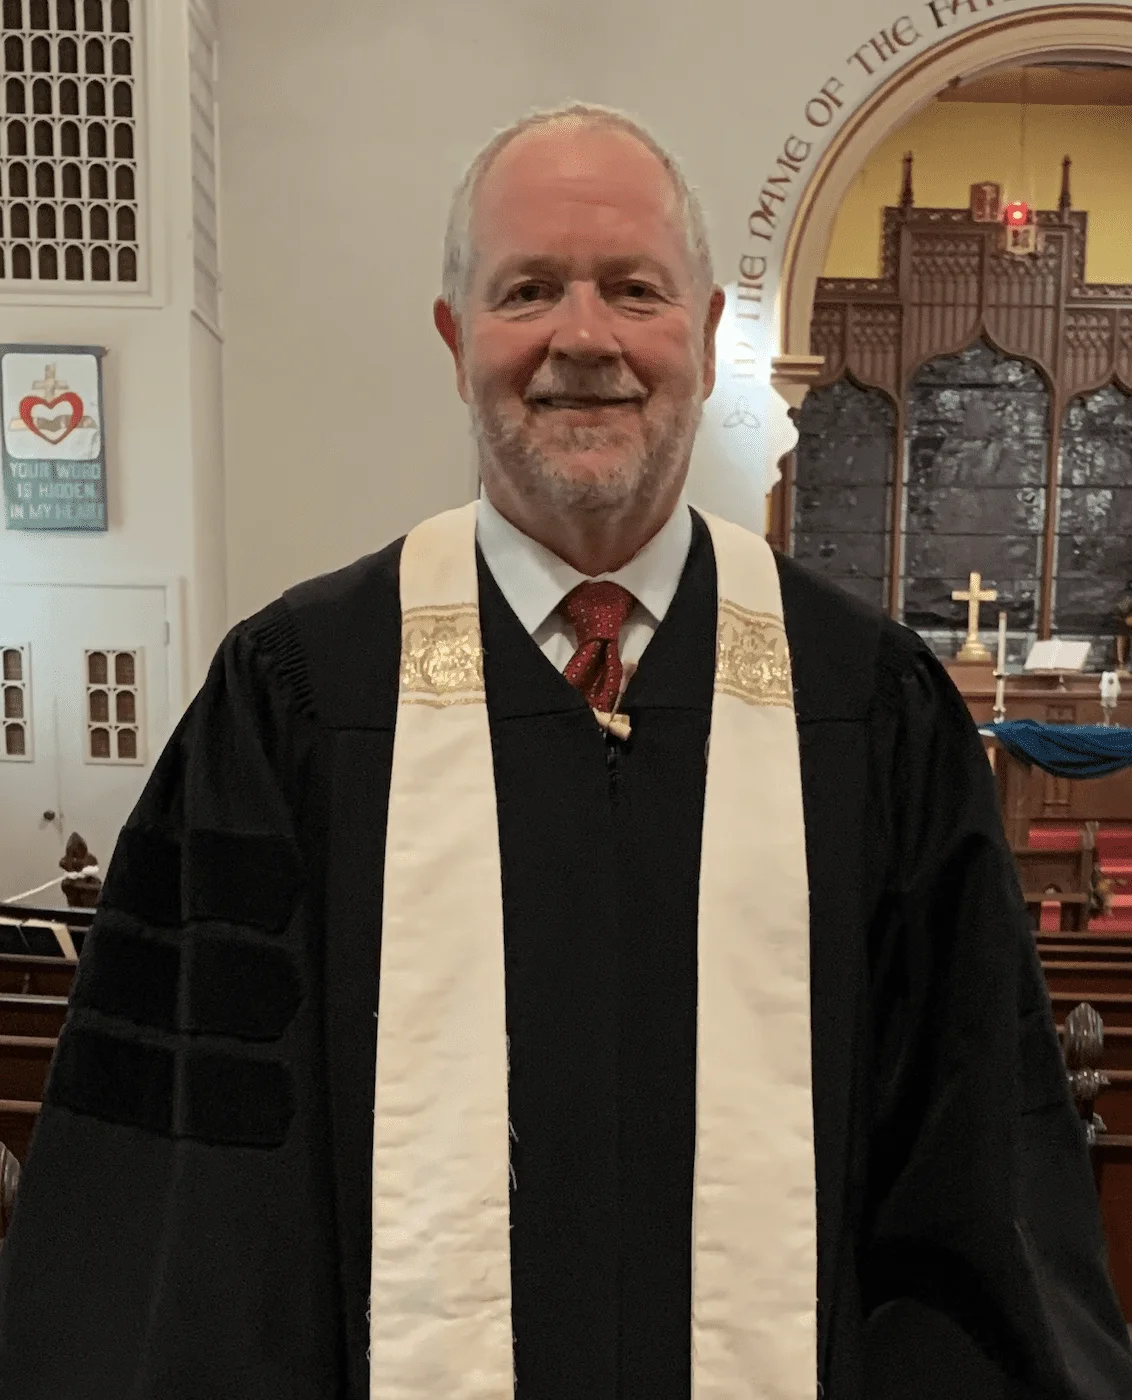 The Reverend Dr. Paul Shupe